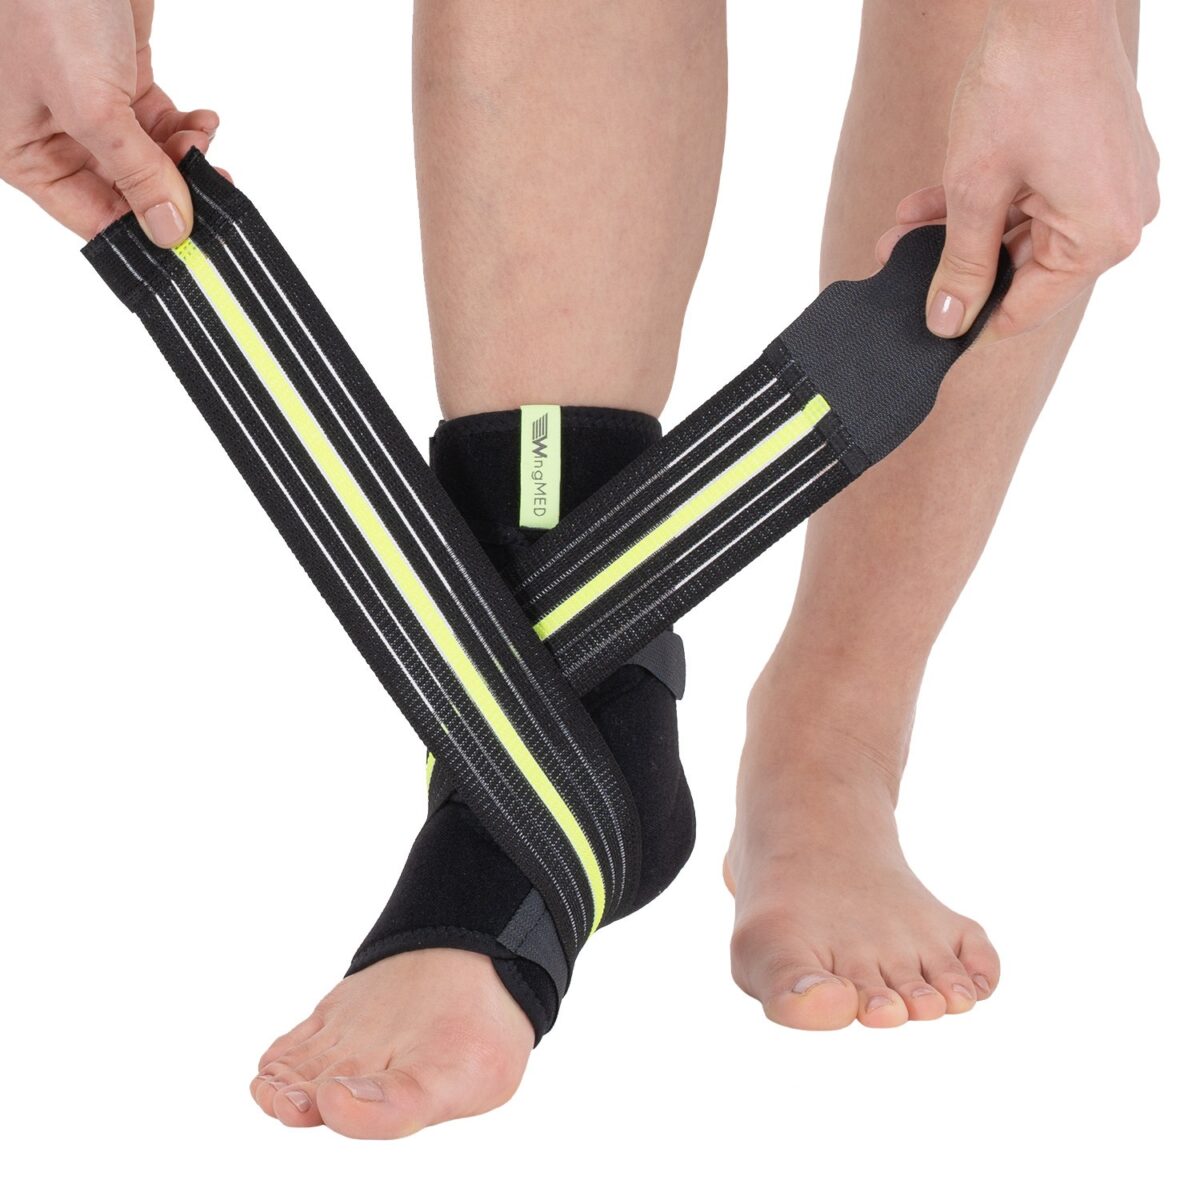 wingmed orthopedic equipments W605 malleol ankle support with 8 strap 78 1